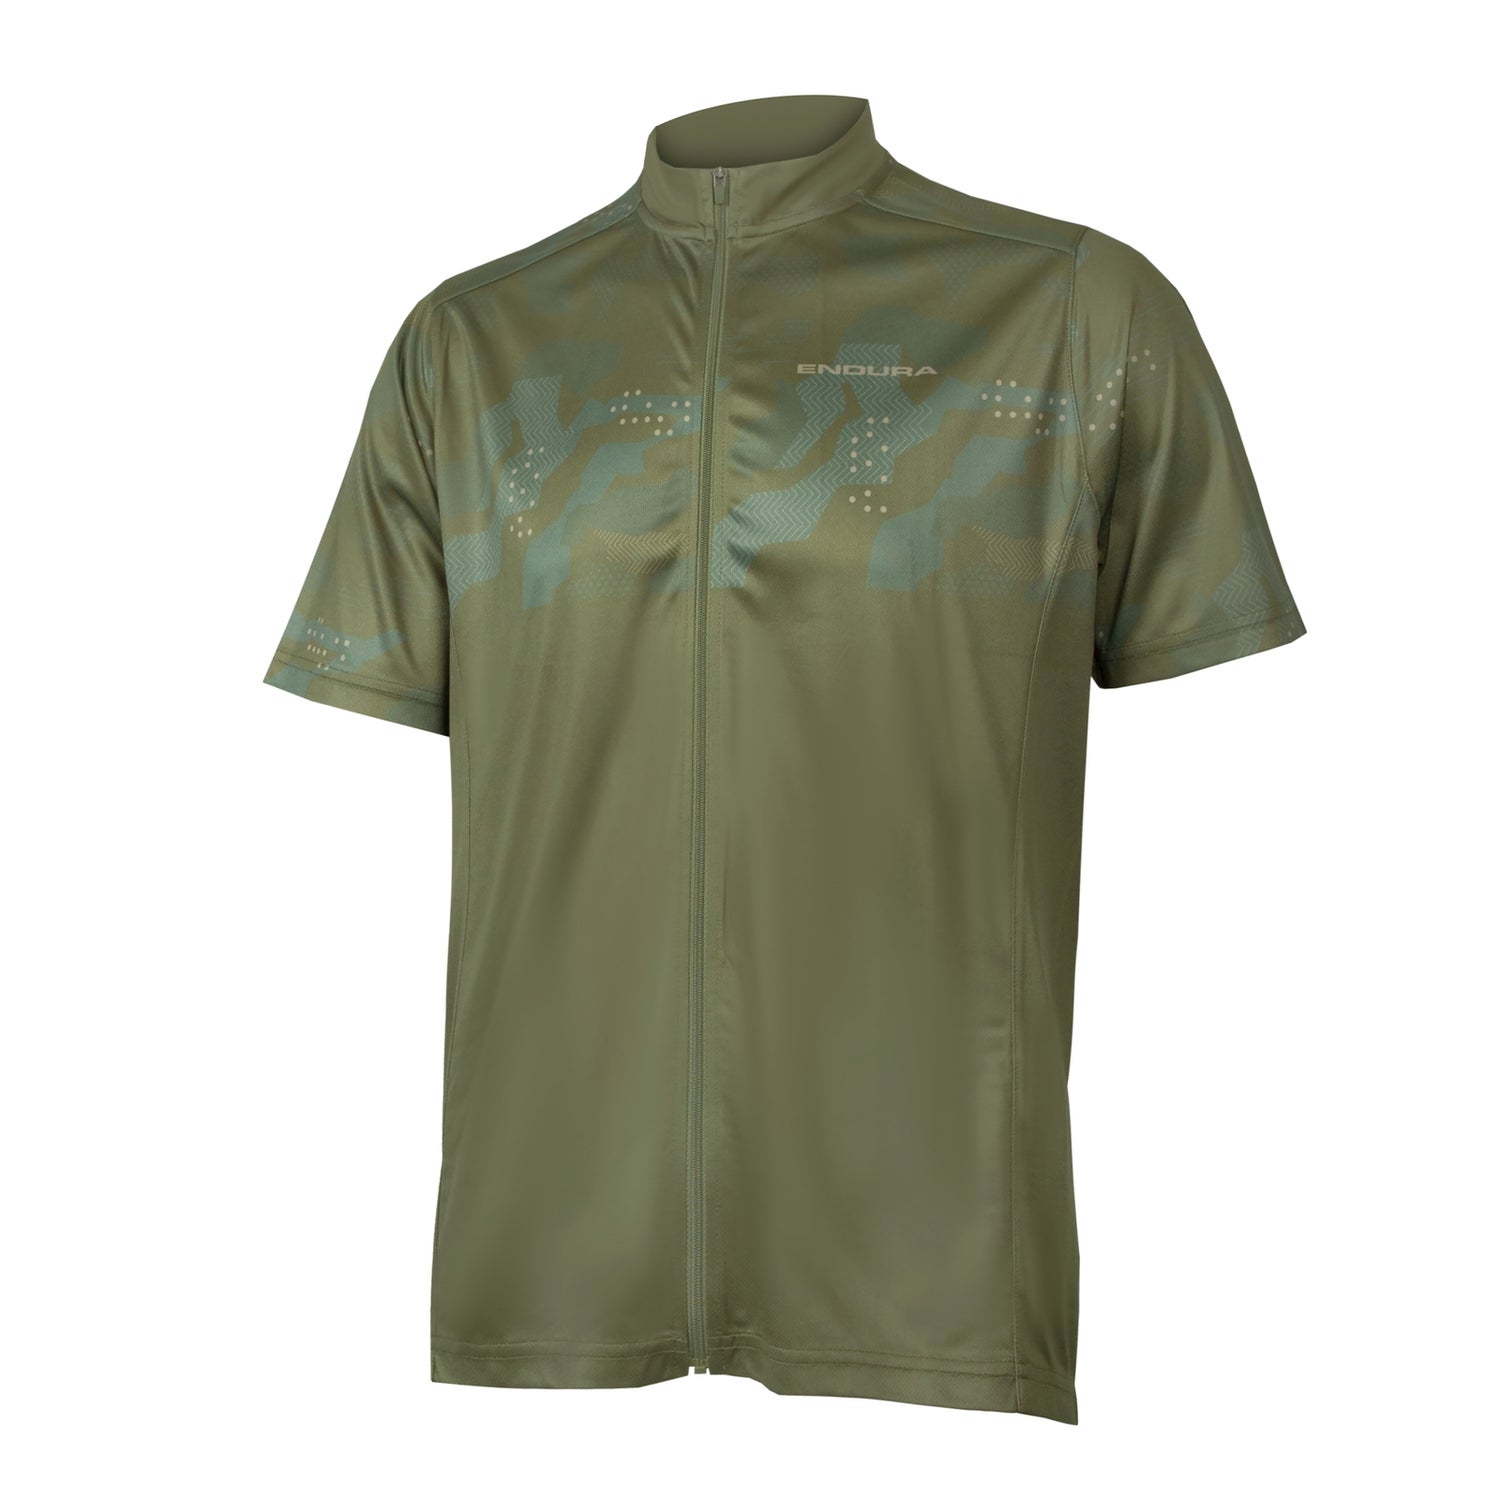 Men's Hummvee Ray S/S Jersey - Olive Green - M